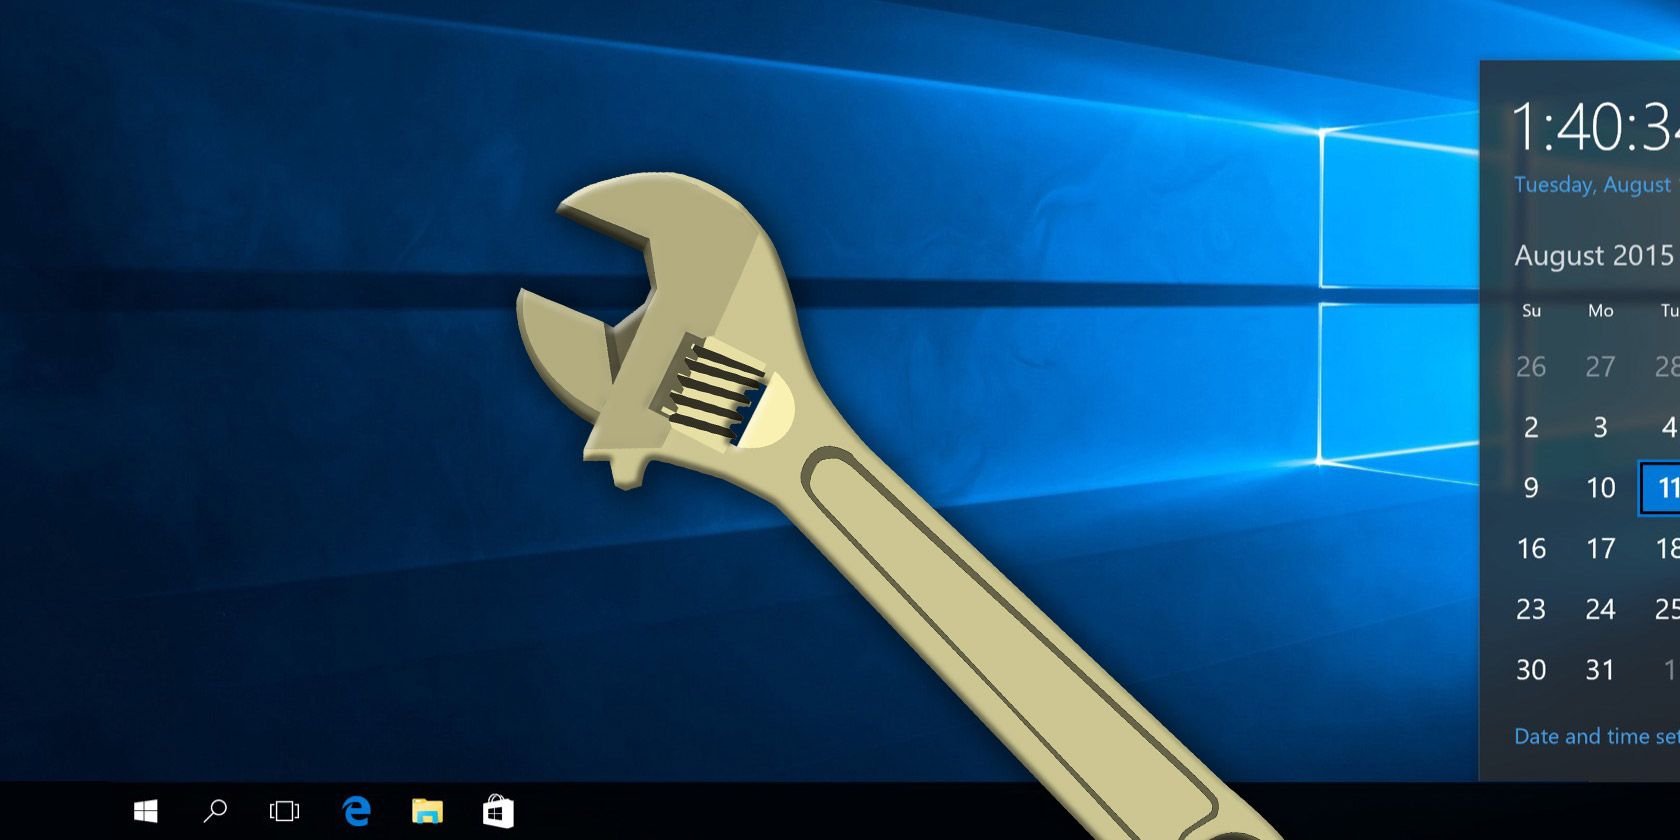 The Best Free Windows 10 Repair Tools to Fix Any Problem